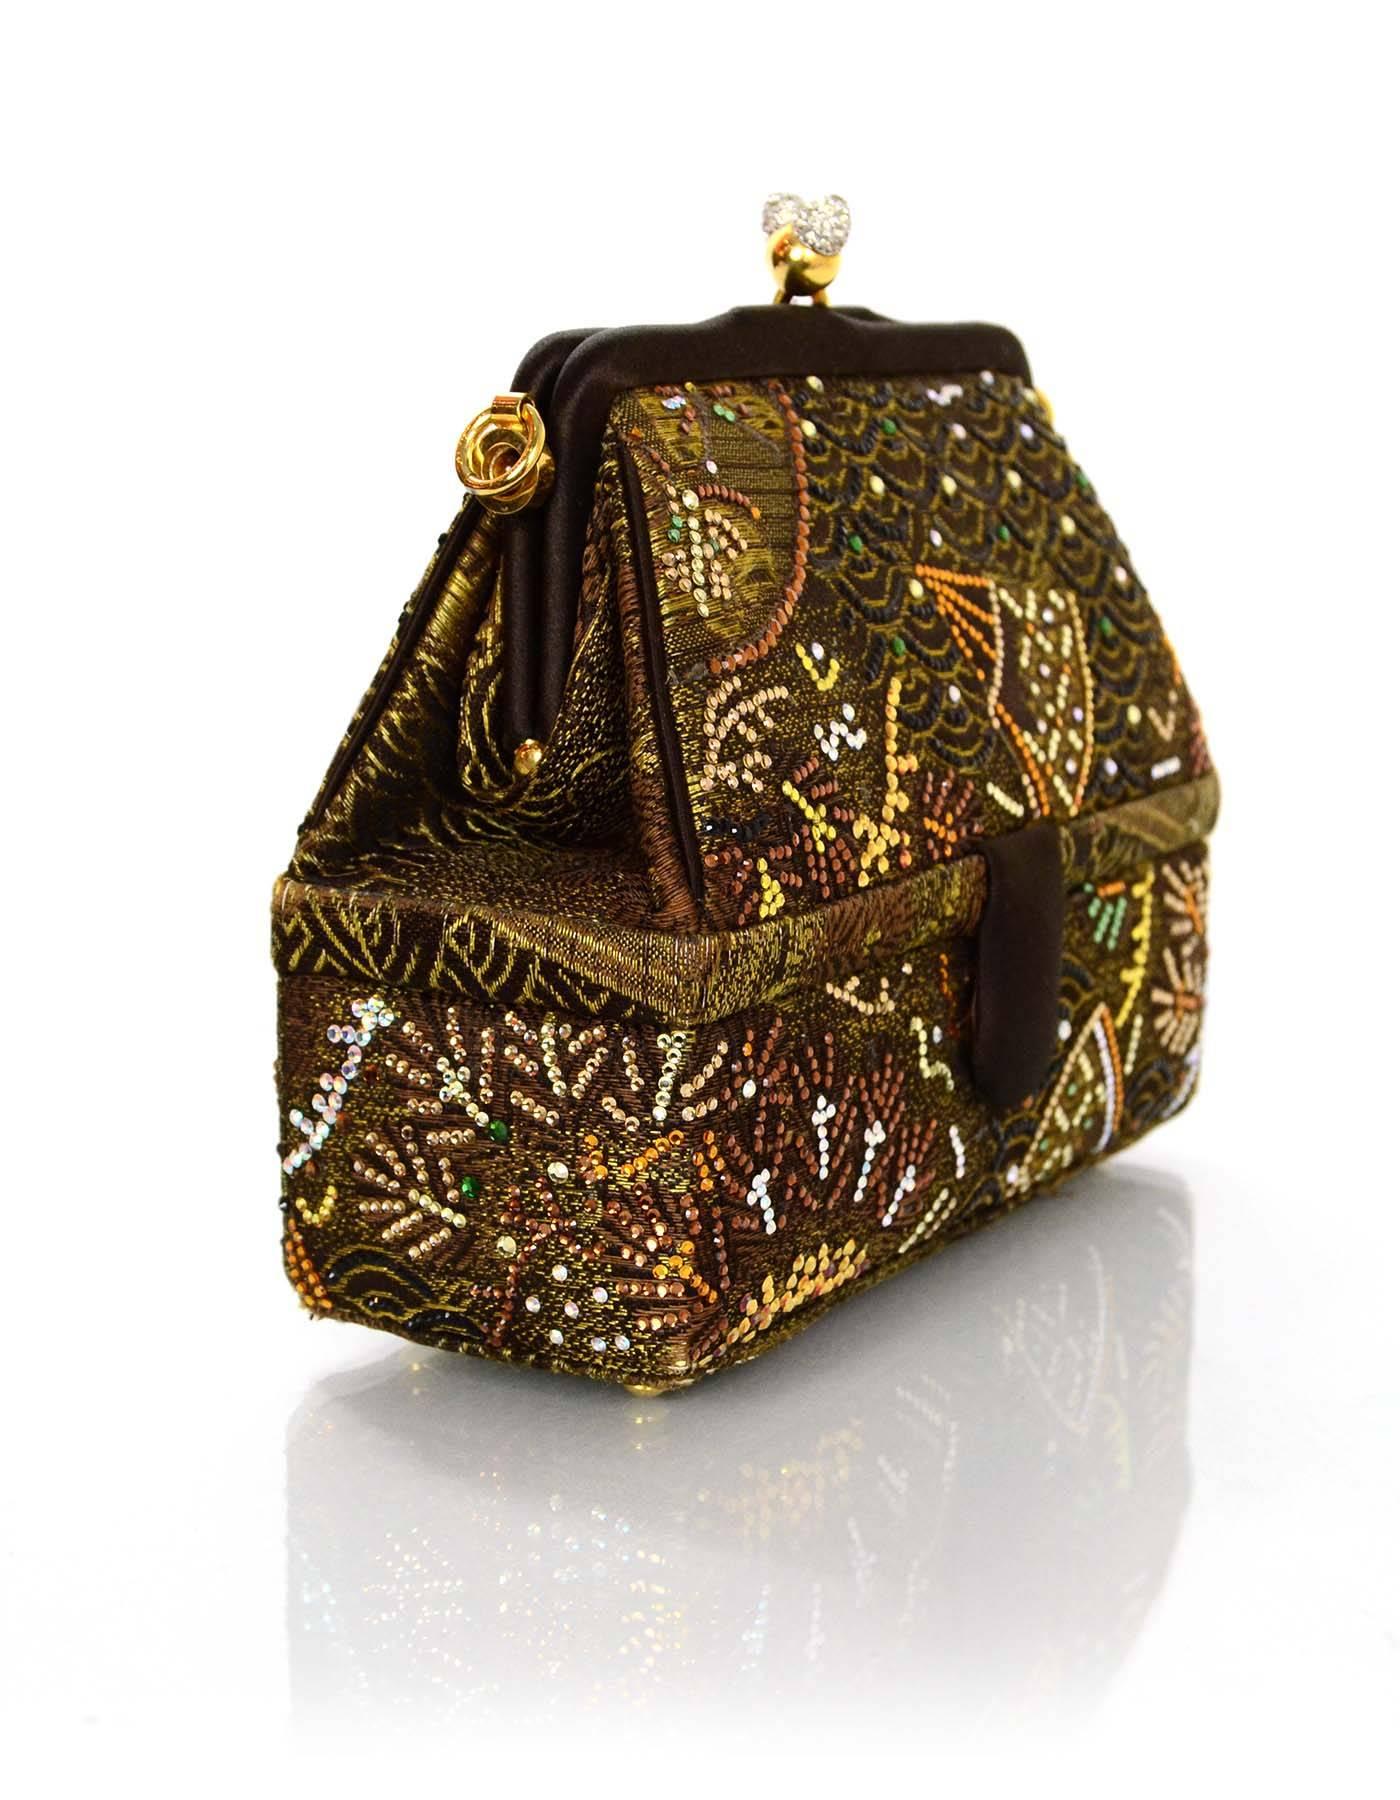 Judith Leiber Embroidered Satin Evening Bag 
Features rhinestone details throughout as well as a detachable satin twist w/tassel shoulder strap
Color: Bronze, burgundy and black
Hardware: Goldtone
Materials: Satin, metal and rhinestones
Lining: